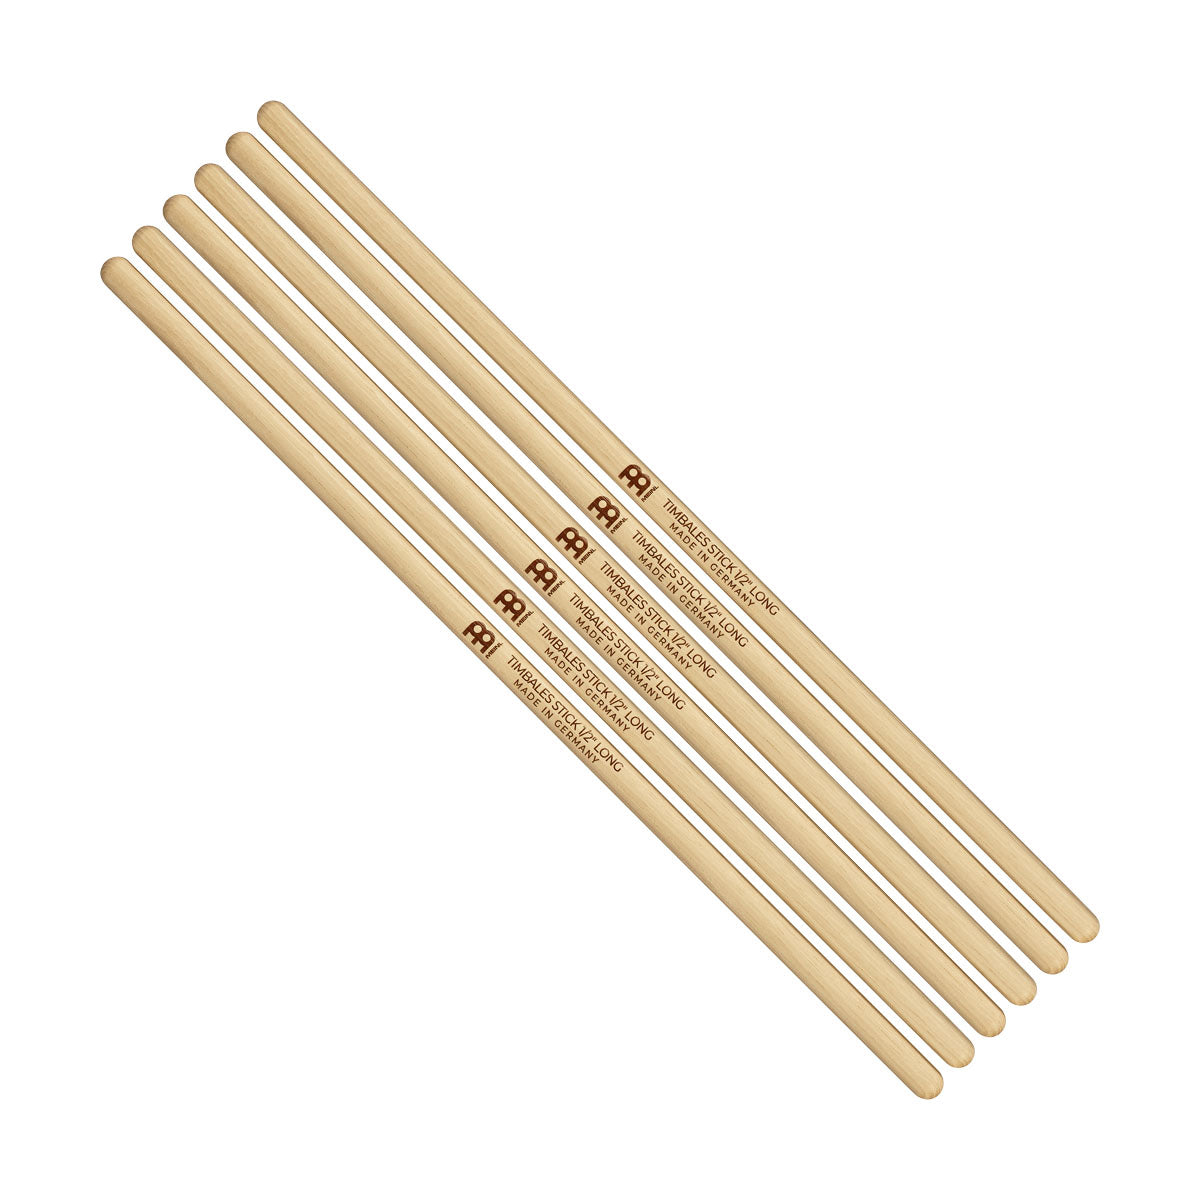 Meinl Timbales Stick 1/2" Long (3 Pack)